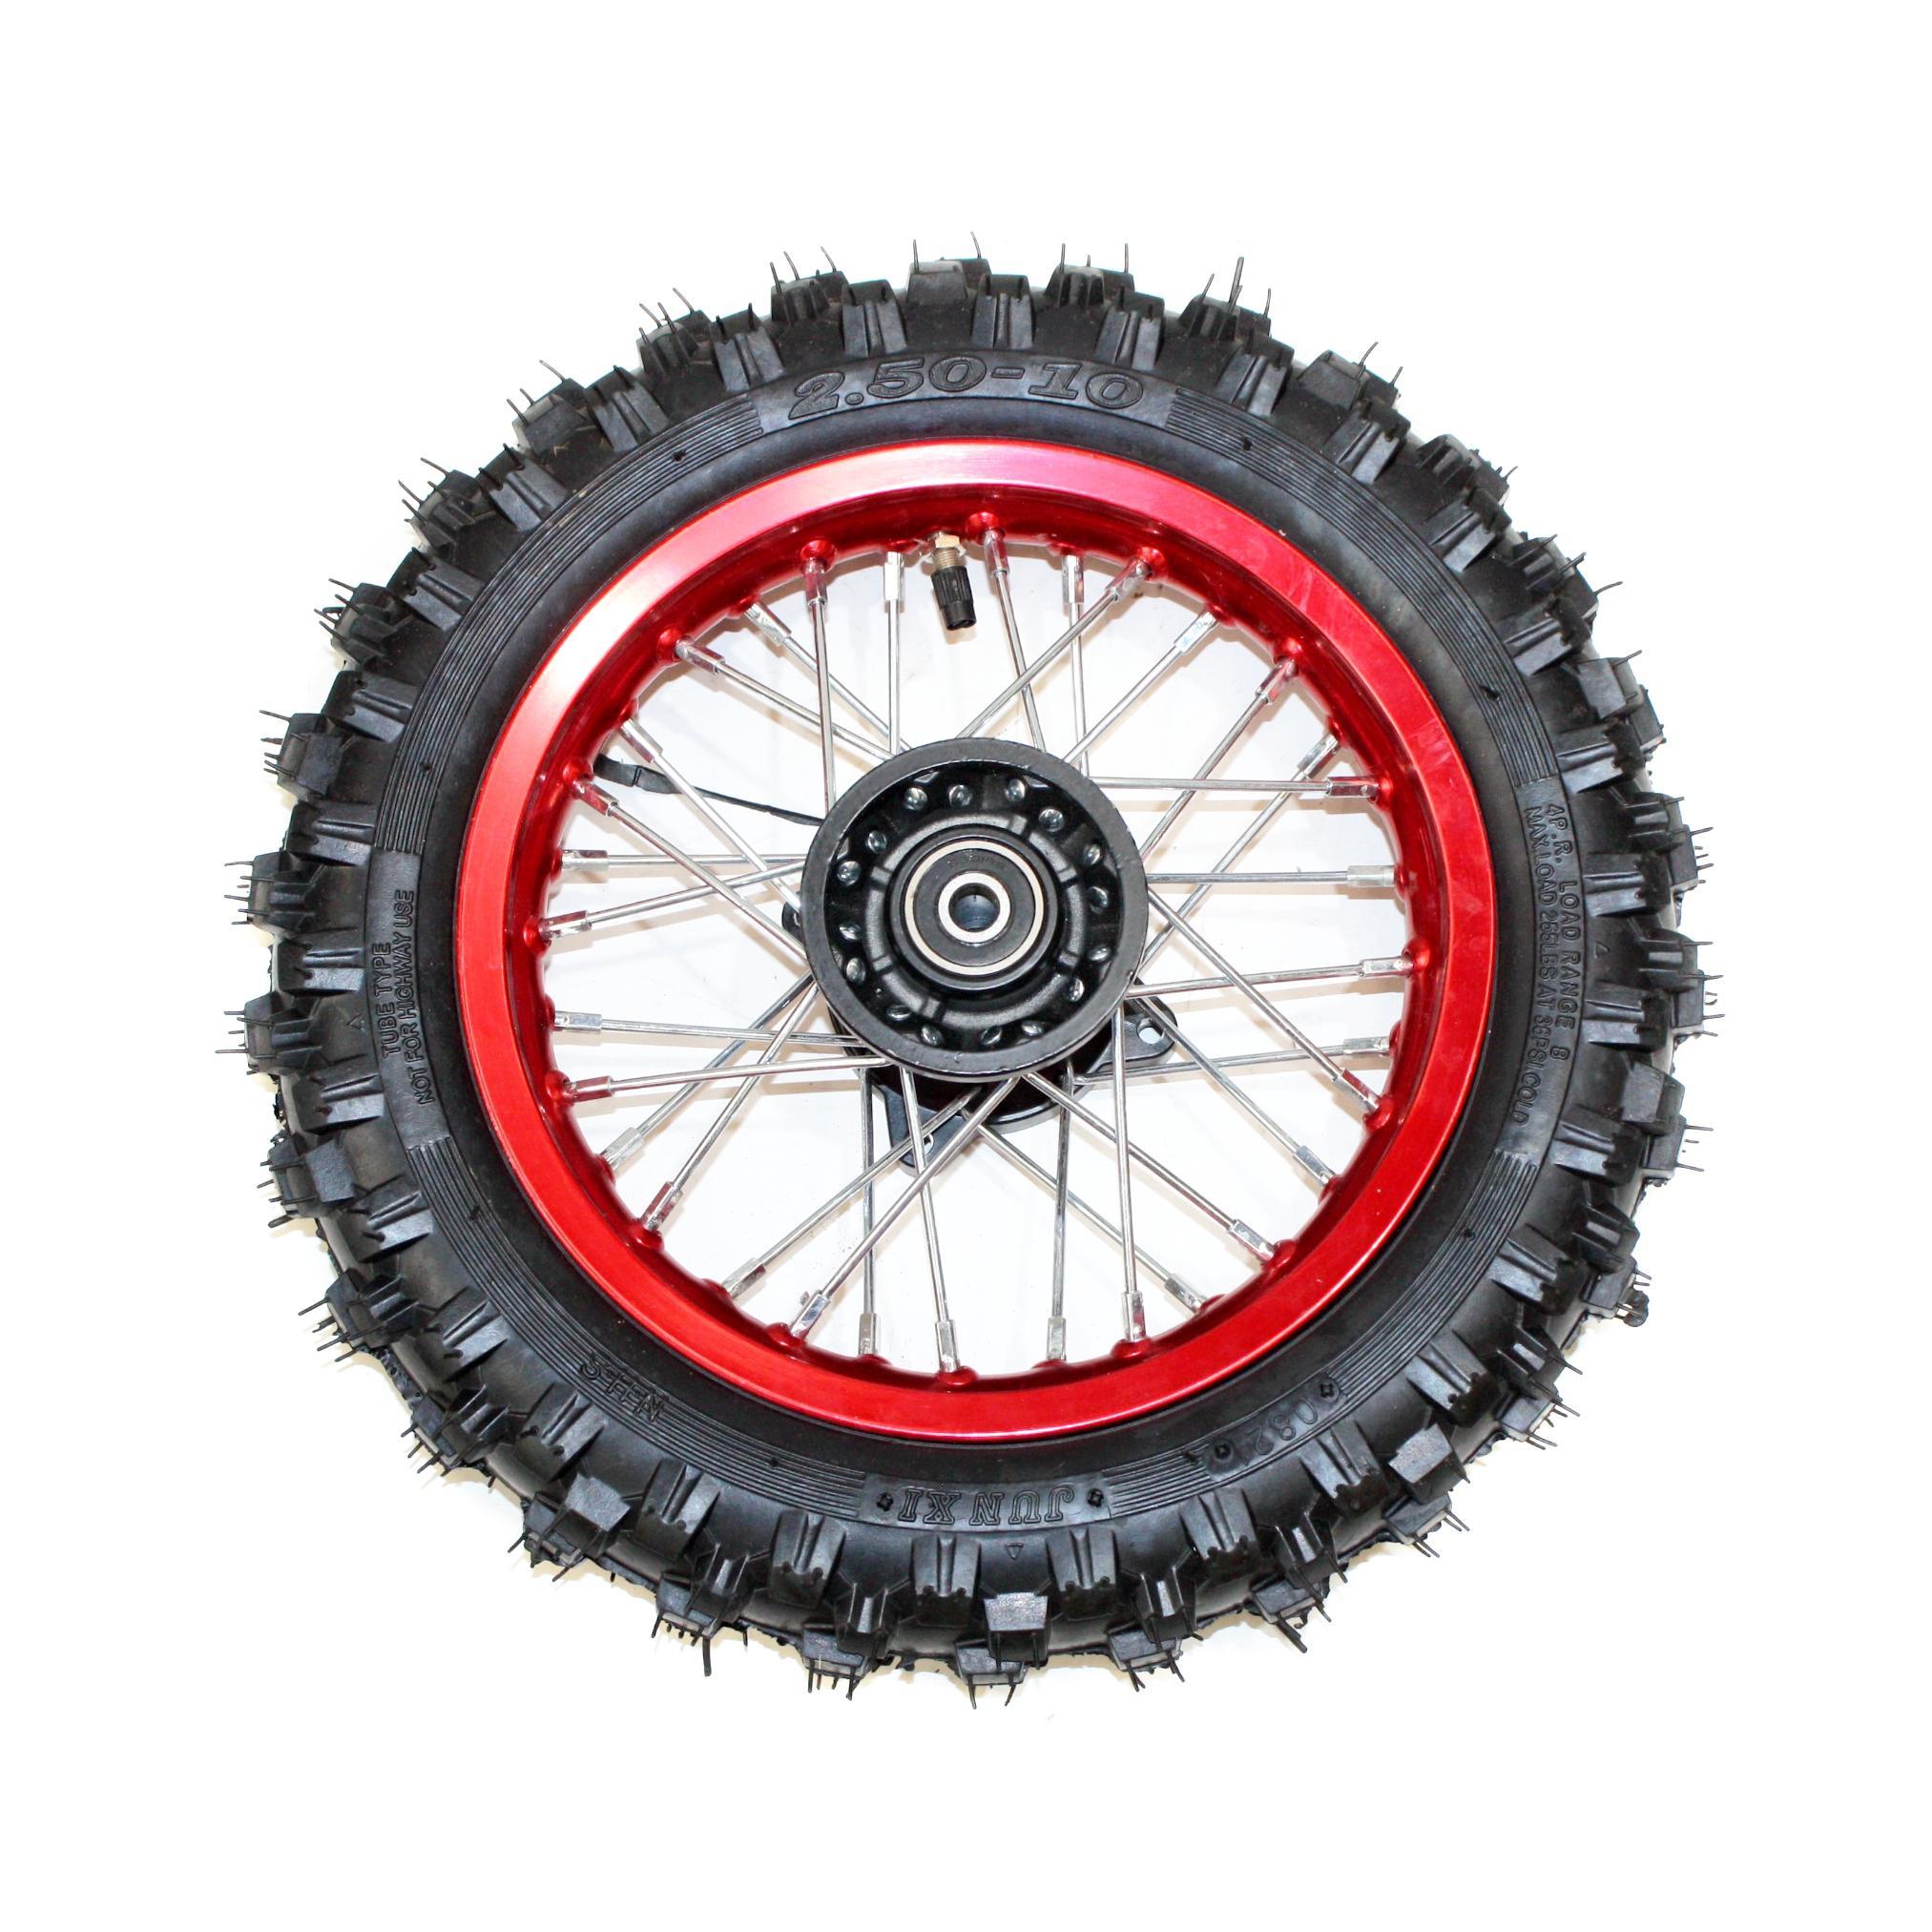 RED 15mm 2.50 - 10 10" Inch Front Wheel Rim Tyre Tire PIT PRO Trail Dirt Bike